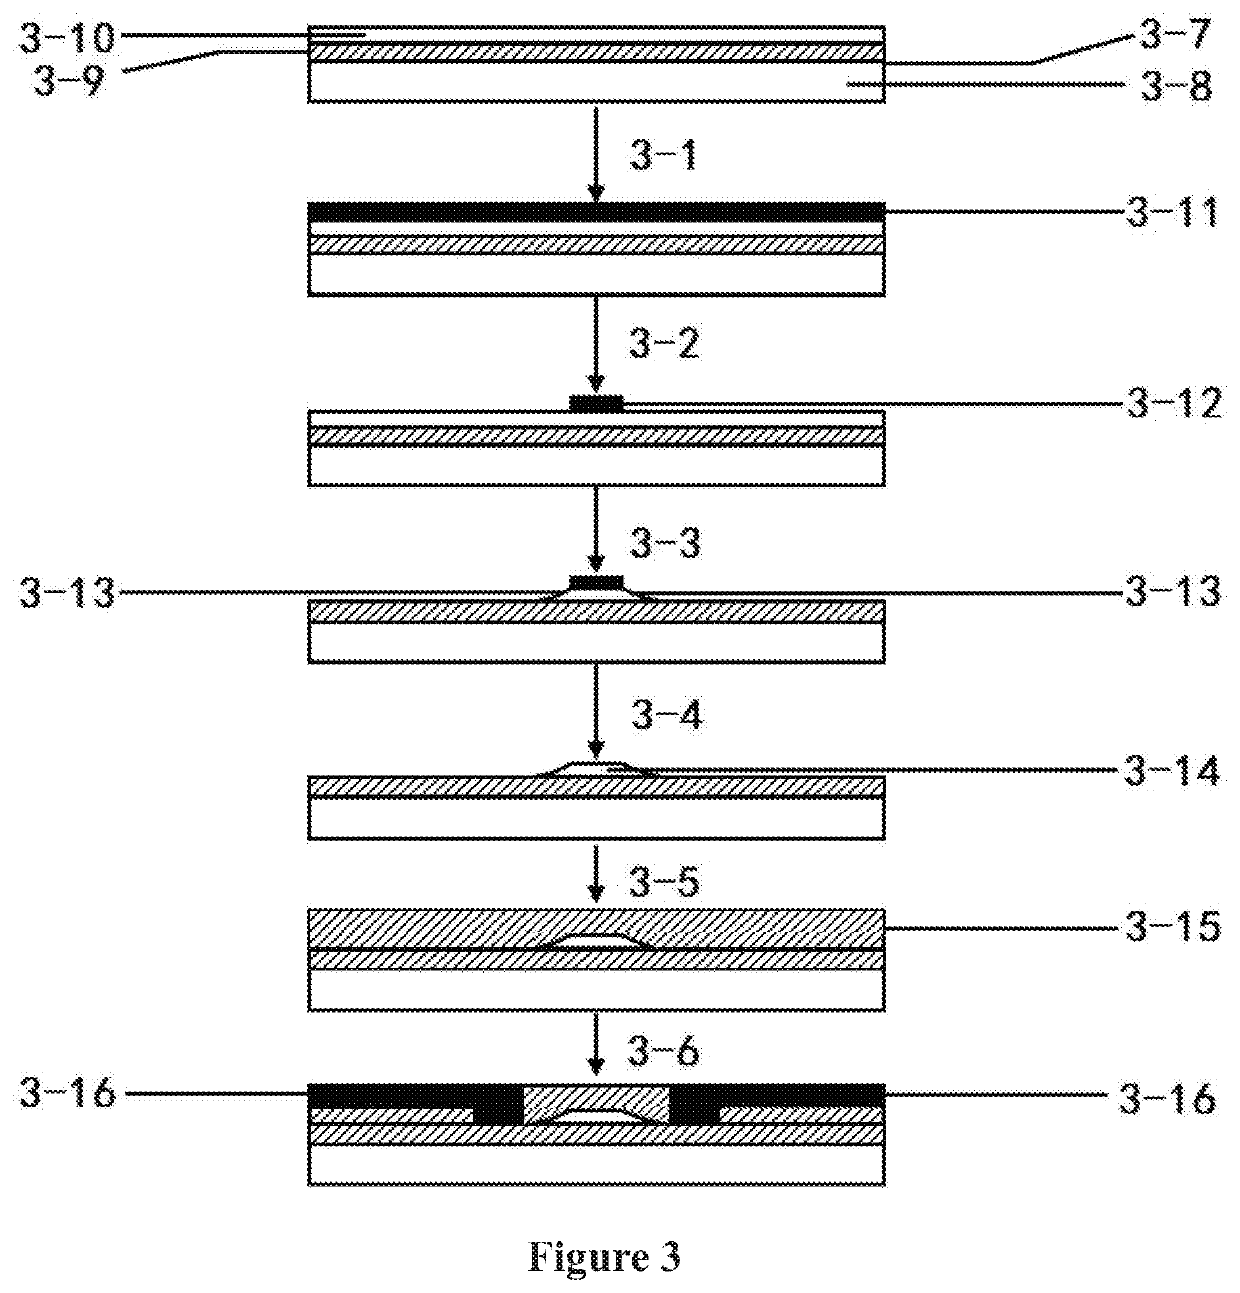 Method for preparing film micro-optical structure based on photolithography and chemomechanical polishing